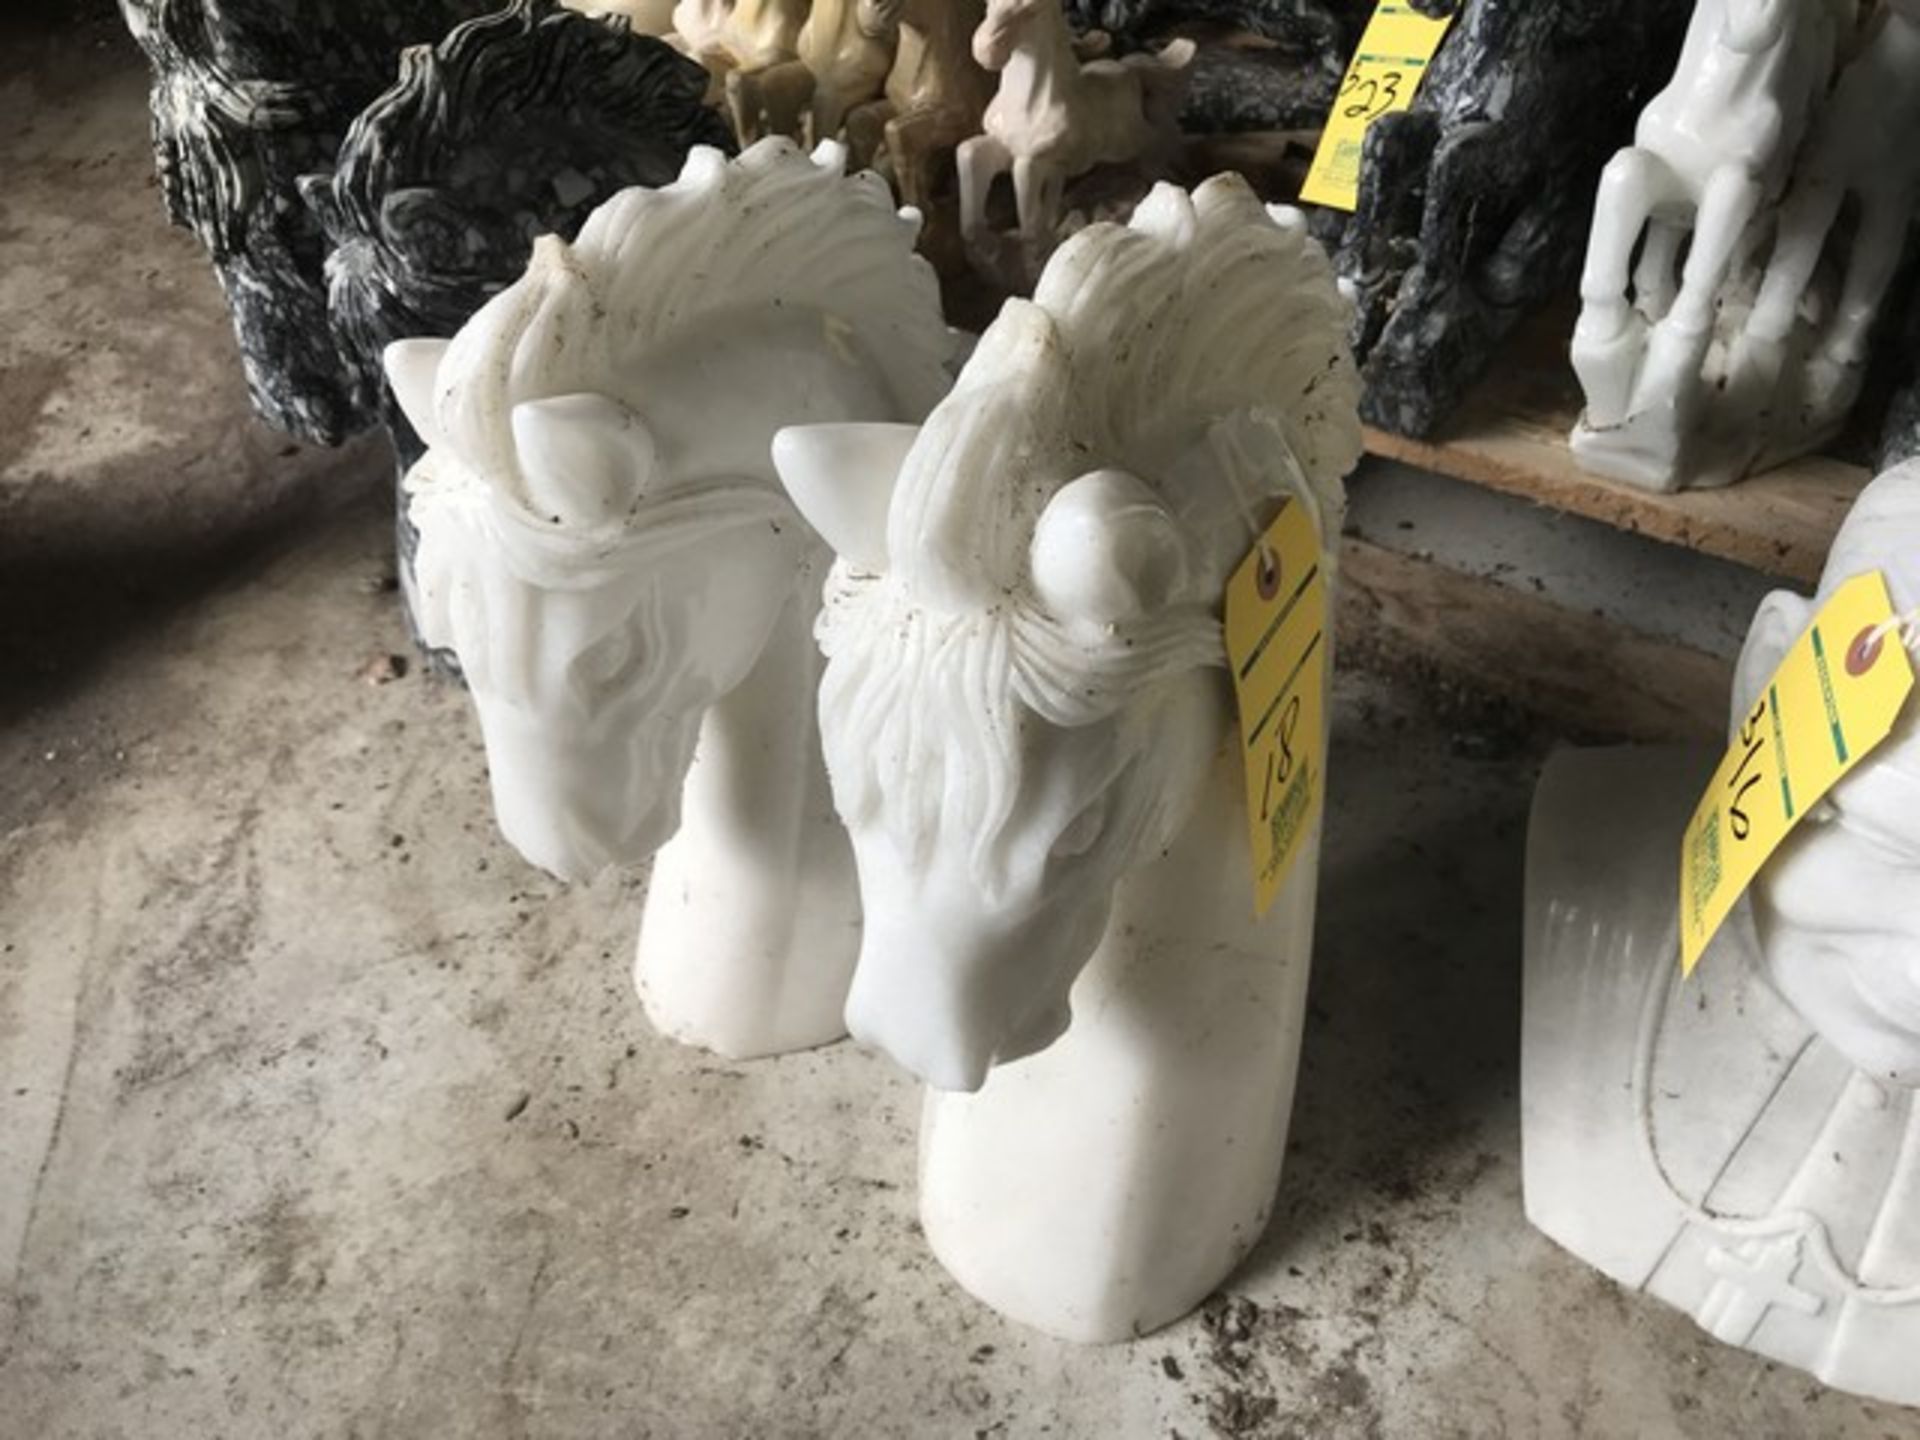 WHITE MARBLE STATUES - HORSE BUSTS - APPROXIMATELY 18''x6''x6'' (FOB LOXAHATCHEE, FL)